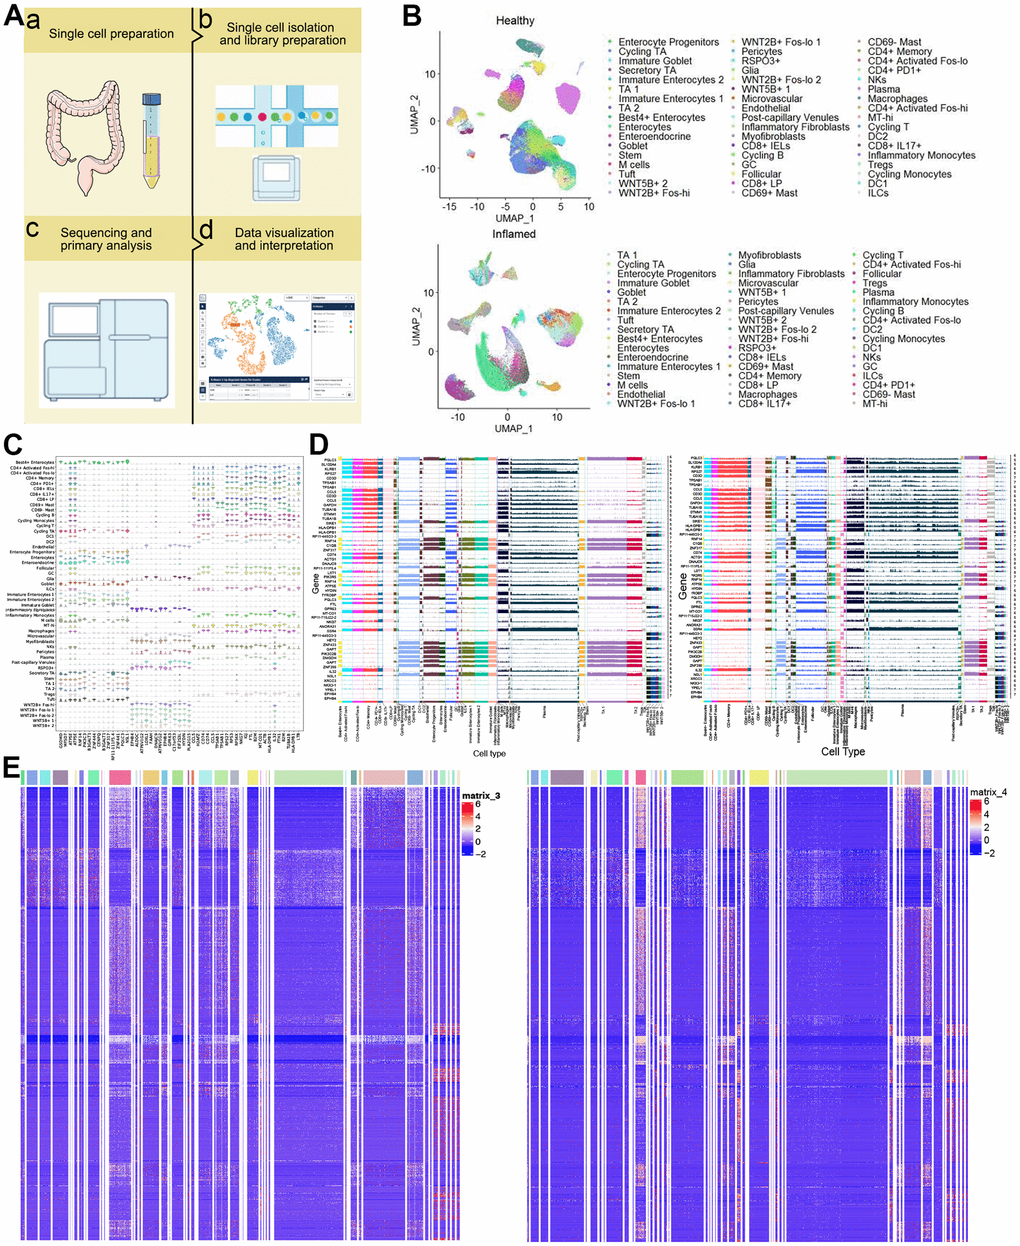 Single-cell transcriptomic profiles from colon biopsies from UC patients and healthy individuals. (A) Study design. (B) 2d visualization of 51 clusters of cells in healthy controls (up) and UC patients (down) on the UMAP plot. (C) Violin plots of specific marker genes in all types in healthy individuals. (D) Ridge plot. Expression of marker genes common to healthy individuals (left) and UC patients (right). (E) The heat map showing expression of UC-specific marker genes in healthy individuals (left) and UC patients (right). UMAP: uniform manifold approximation and projection for dimension reduction. UC: ulcerative colitis.